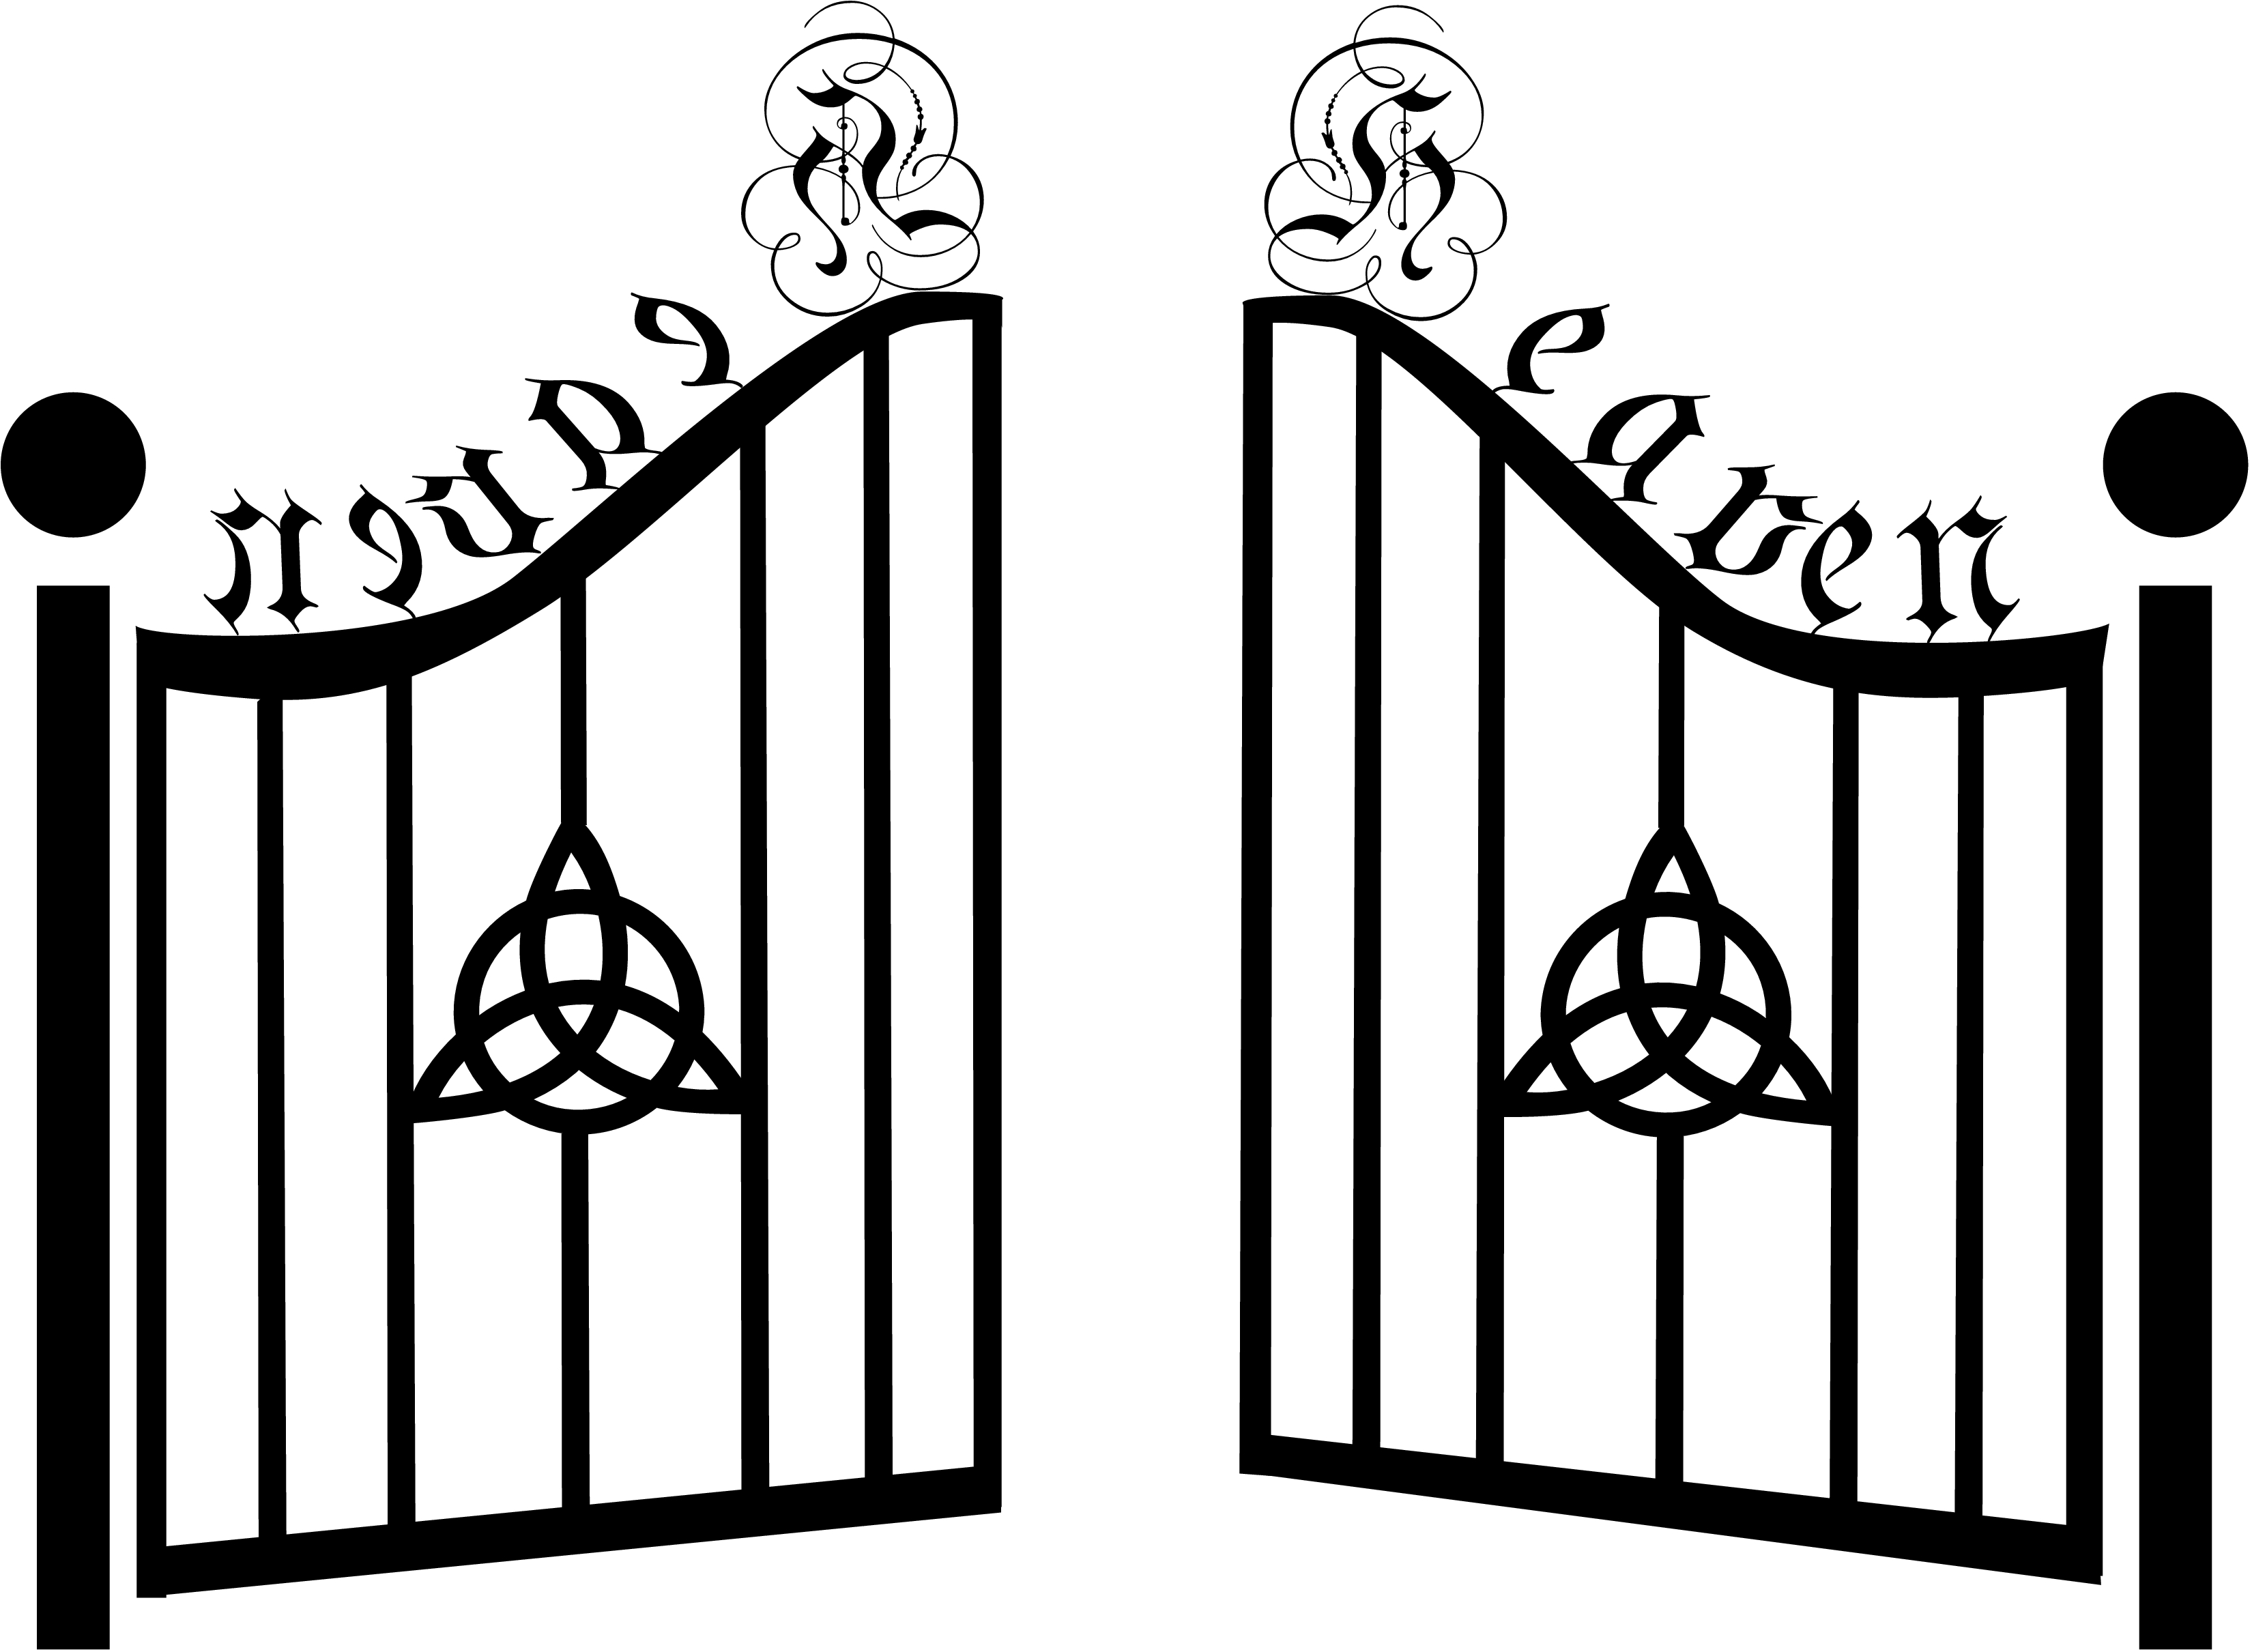 clipart of a gate - photo #10